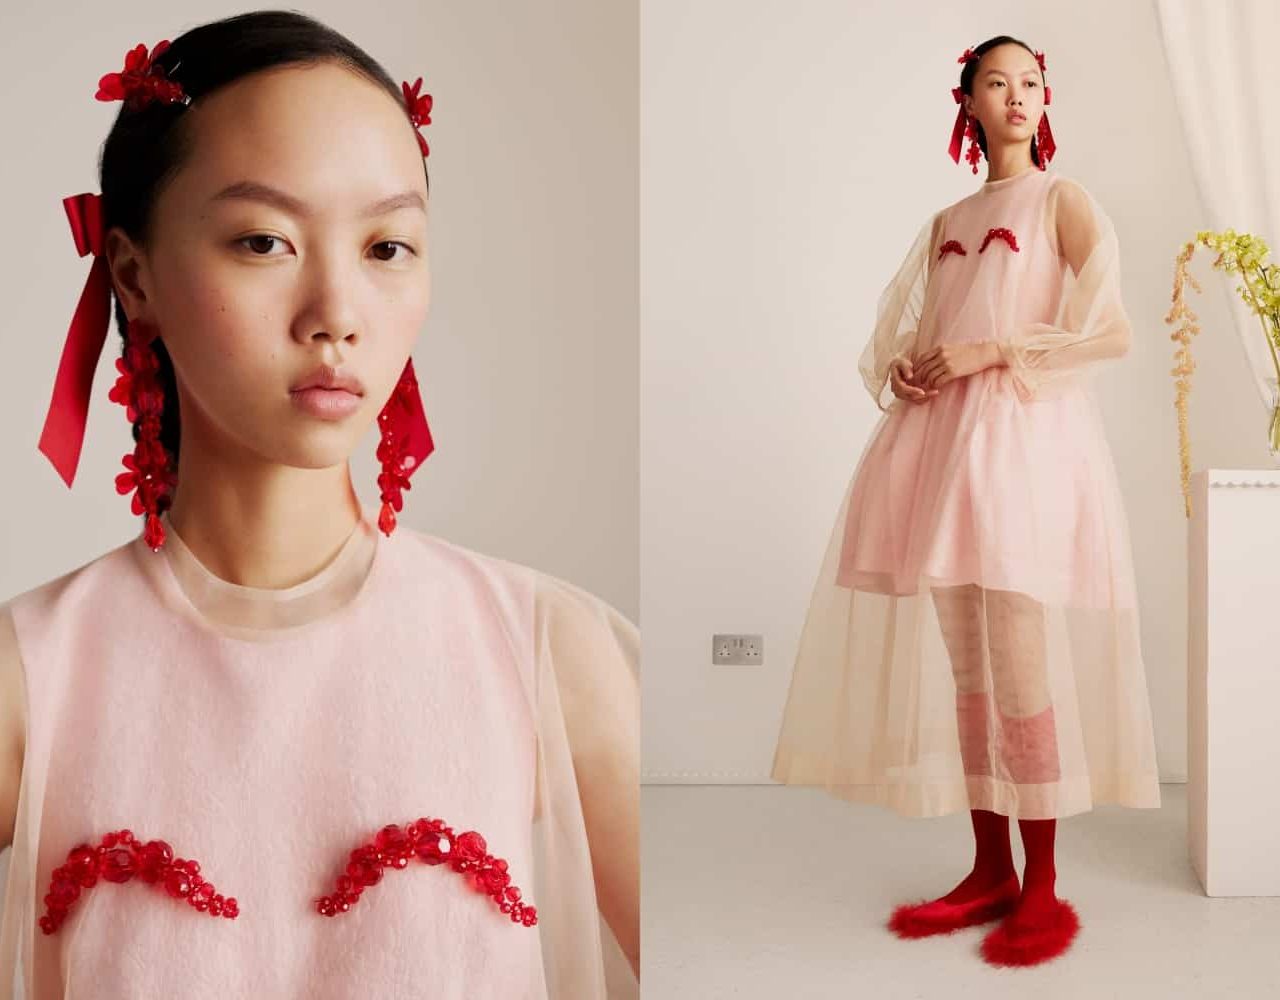 H&m X Simone Rocha Is 2021's Most Exciting Collaboration